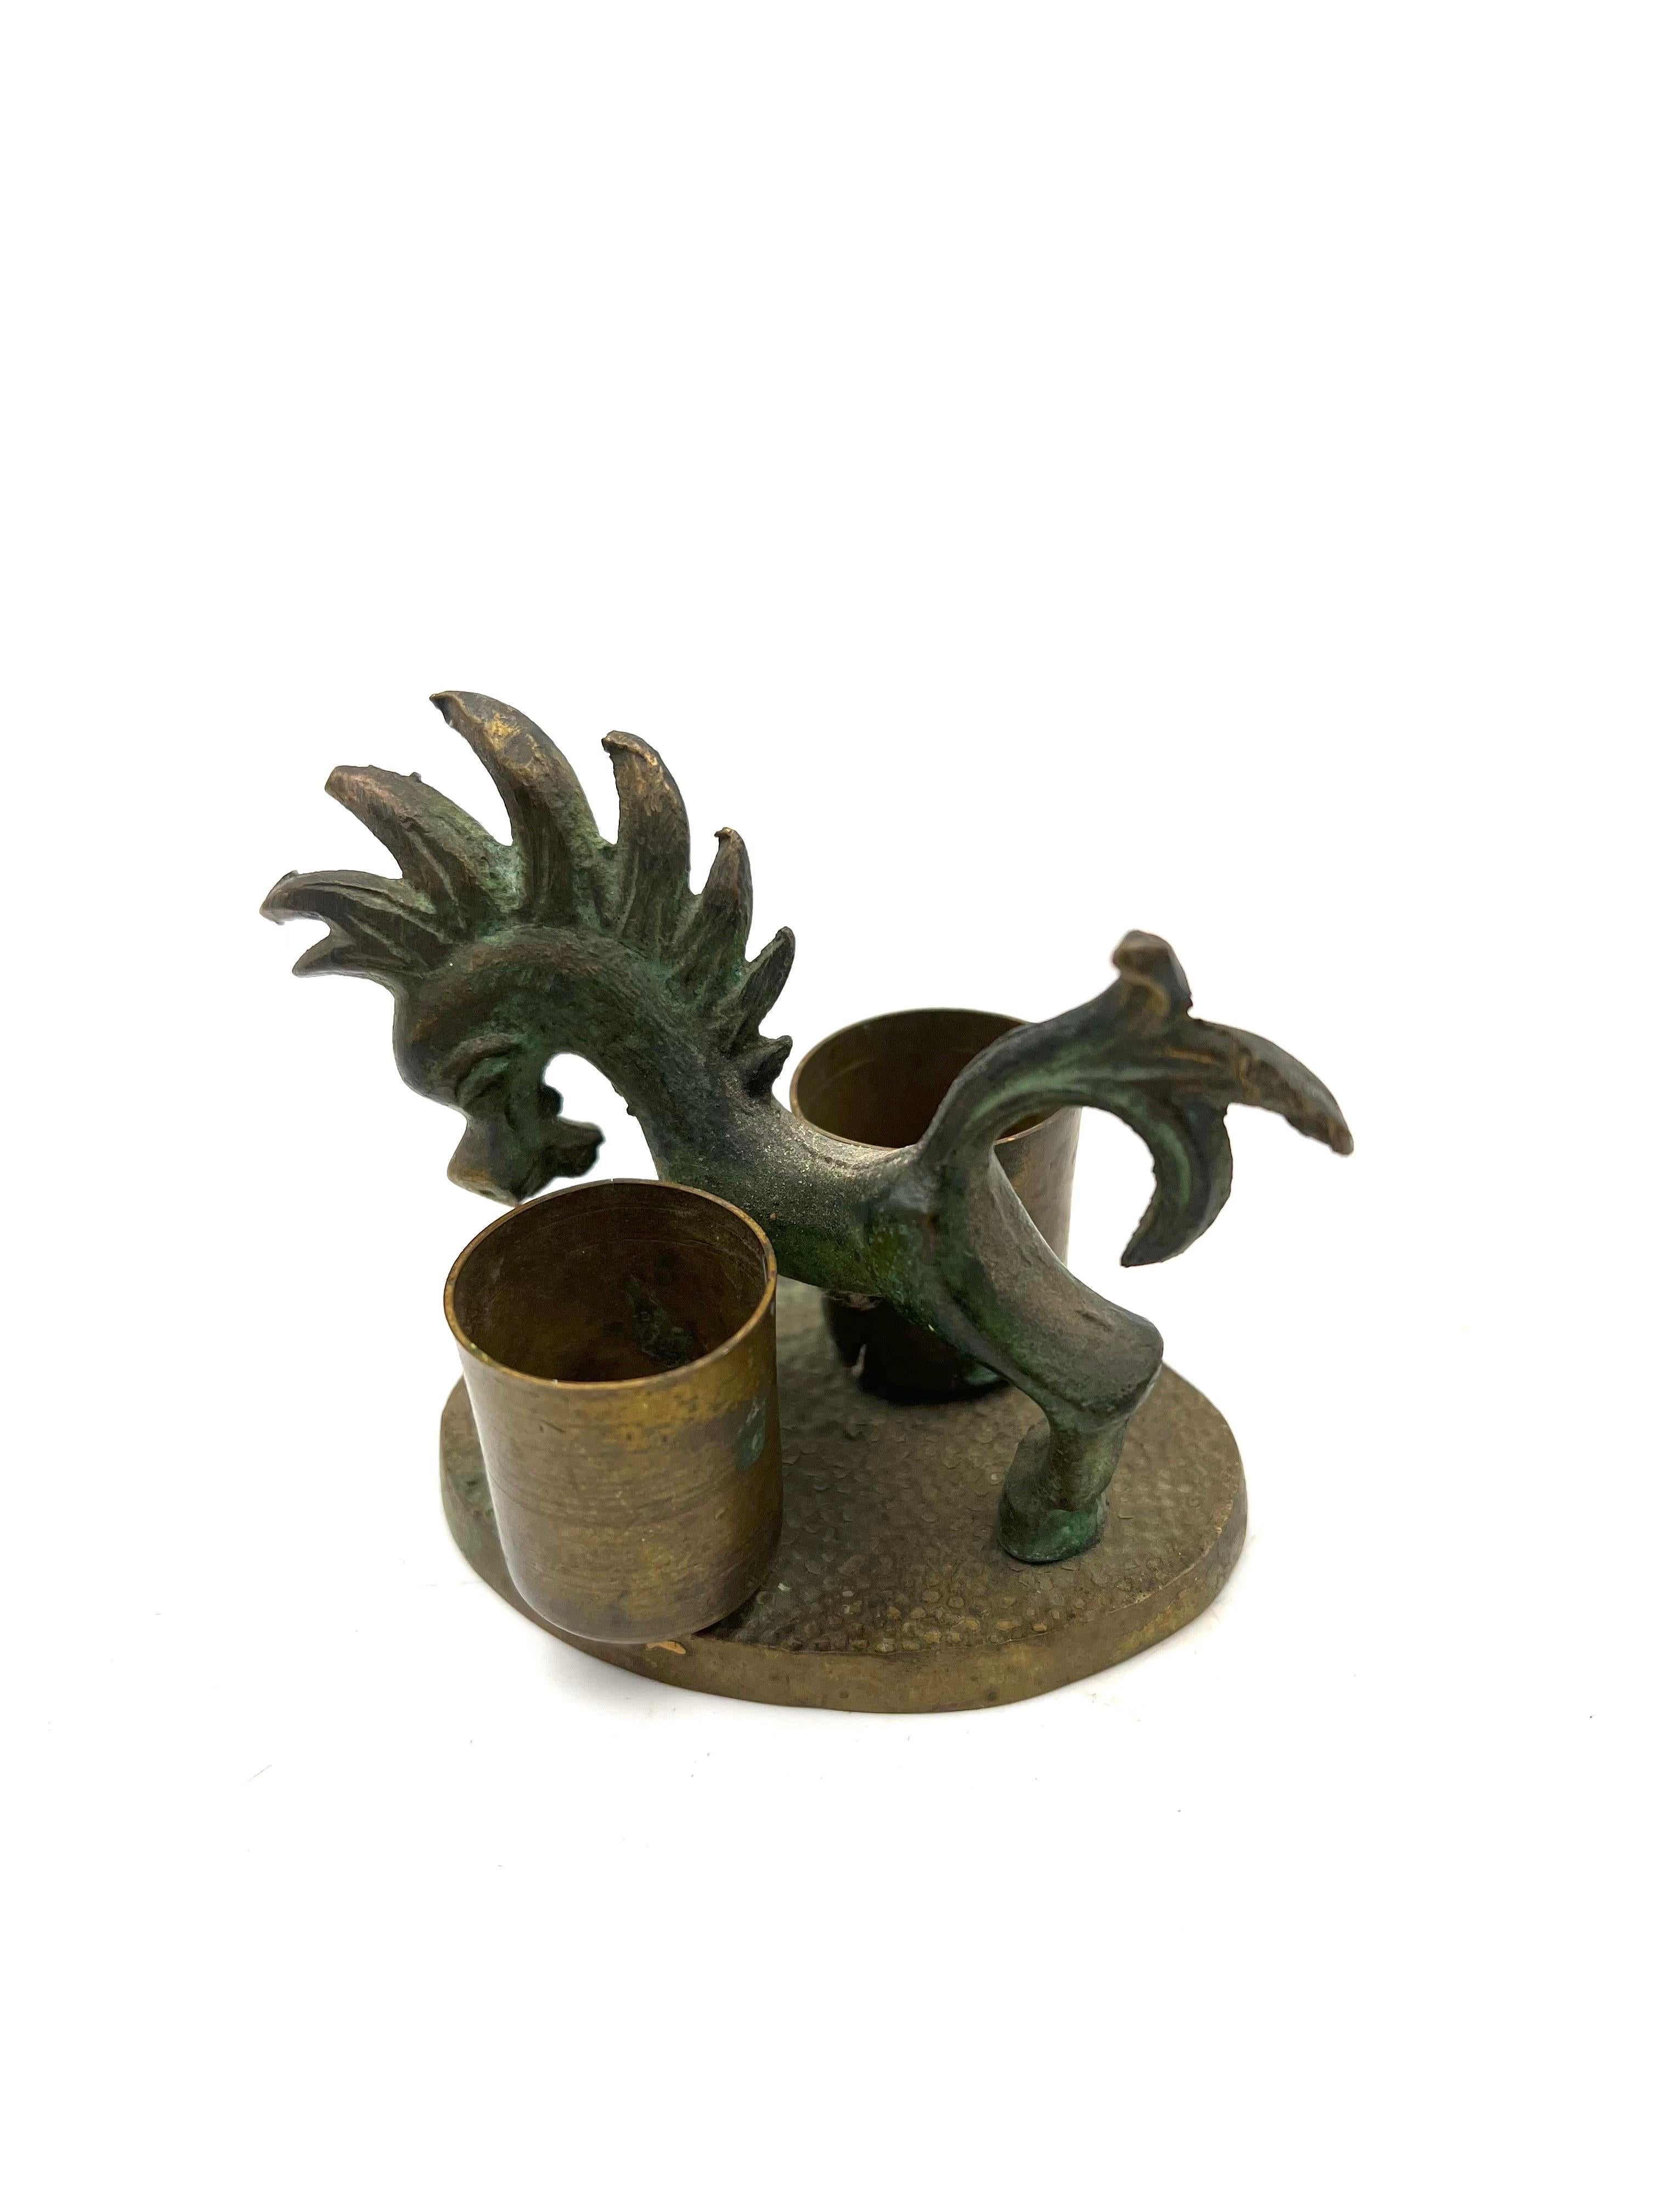 Whimsical petite horse sculpture candle holder in brass and bronze finish, circa 1950s.